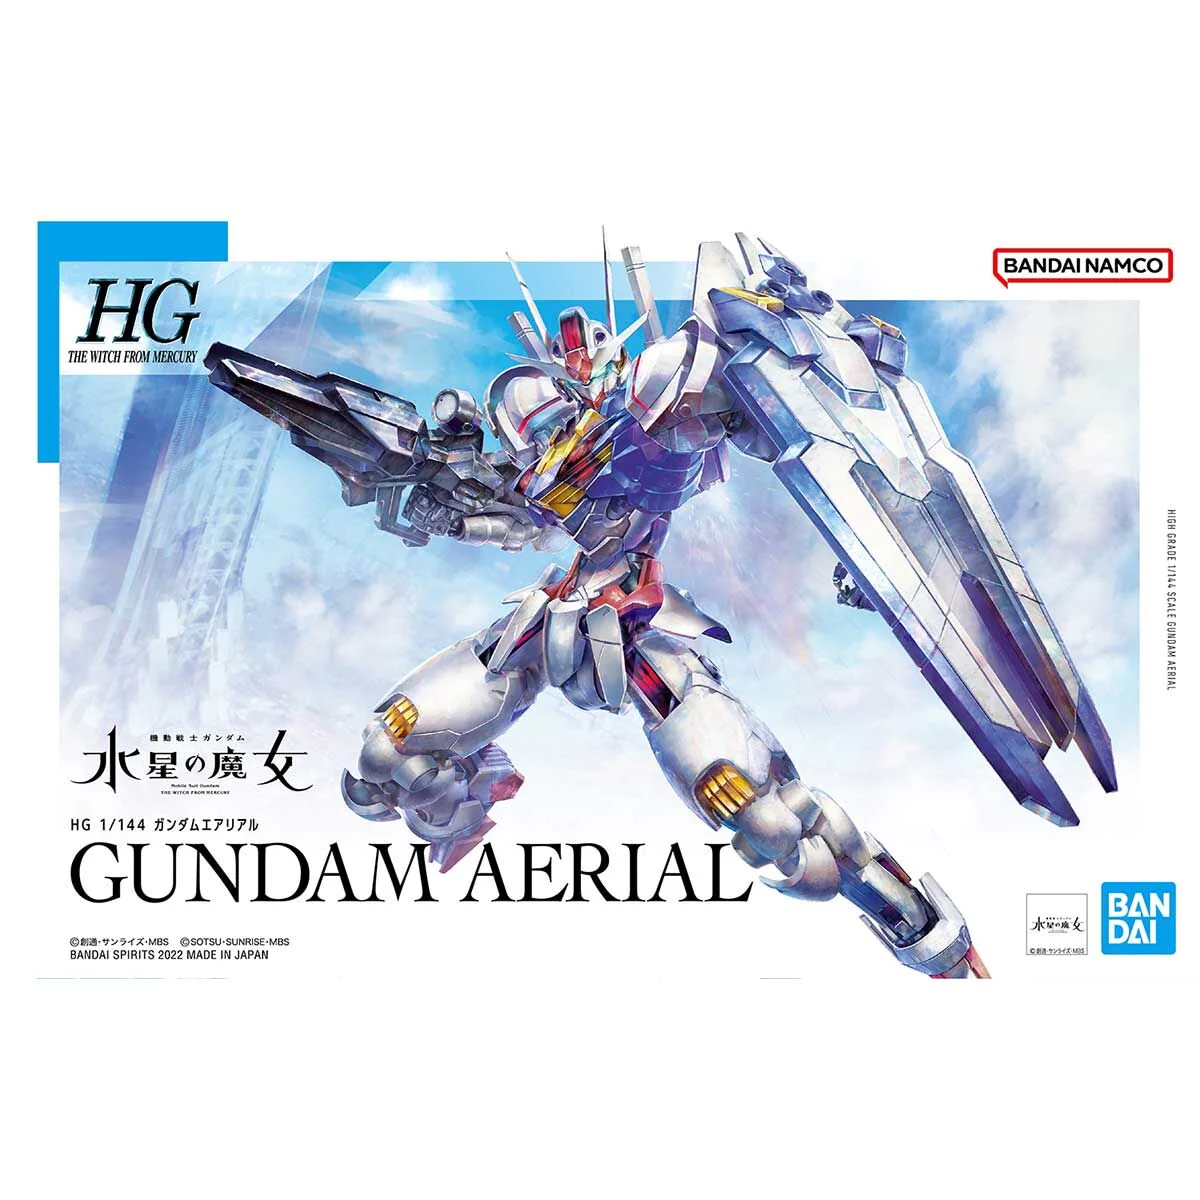 Gundam Aerial - The witch from Mercury